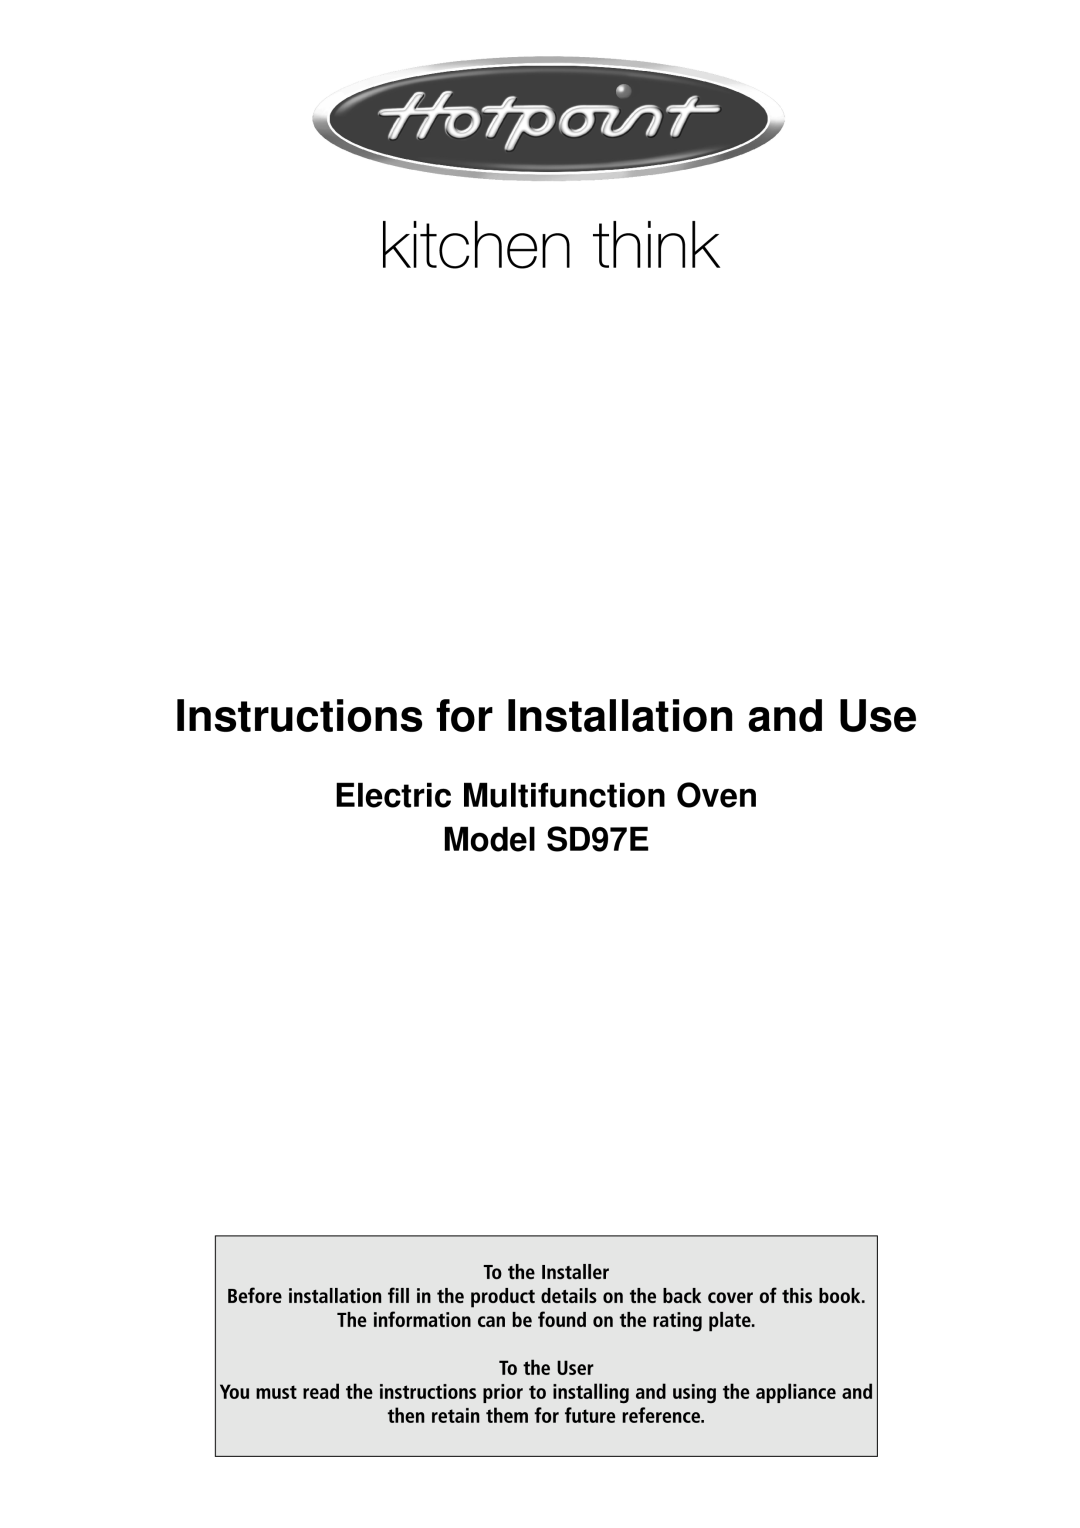 Hotpoint manual Electric Multifunction Oven Model SD97E, Instructions for Installation and Use 